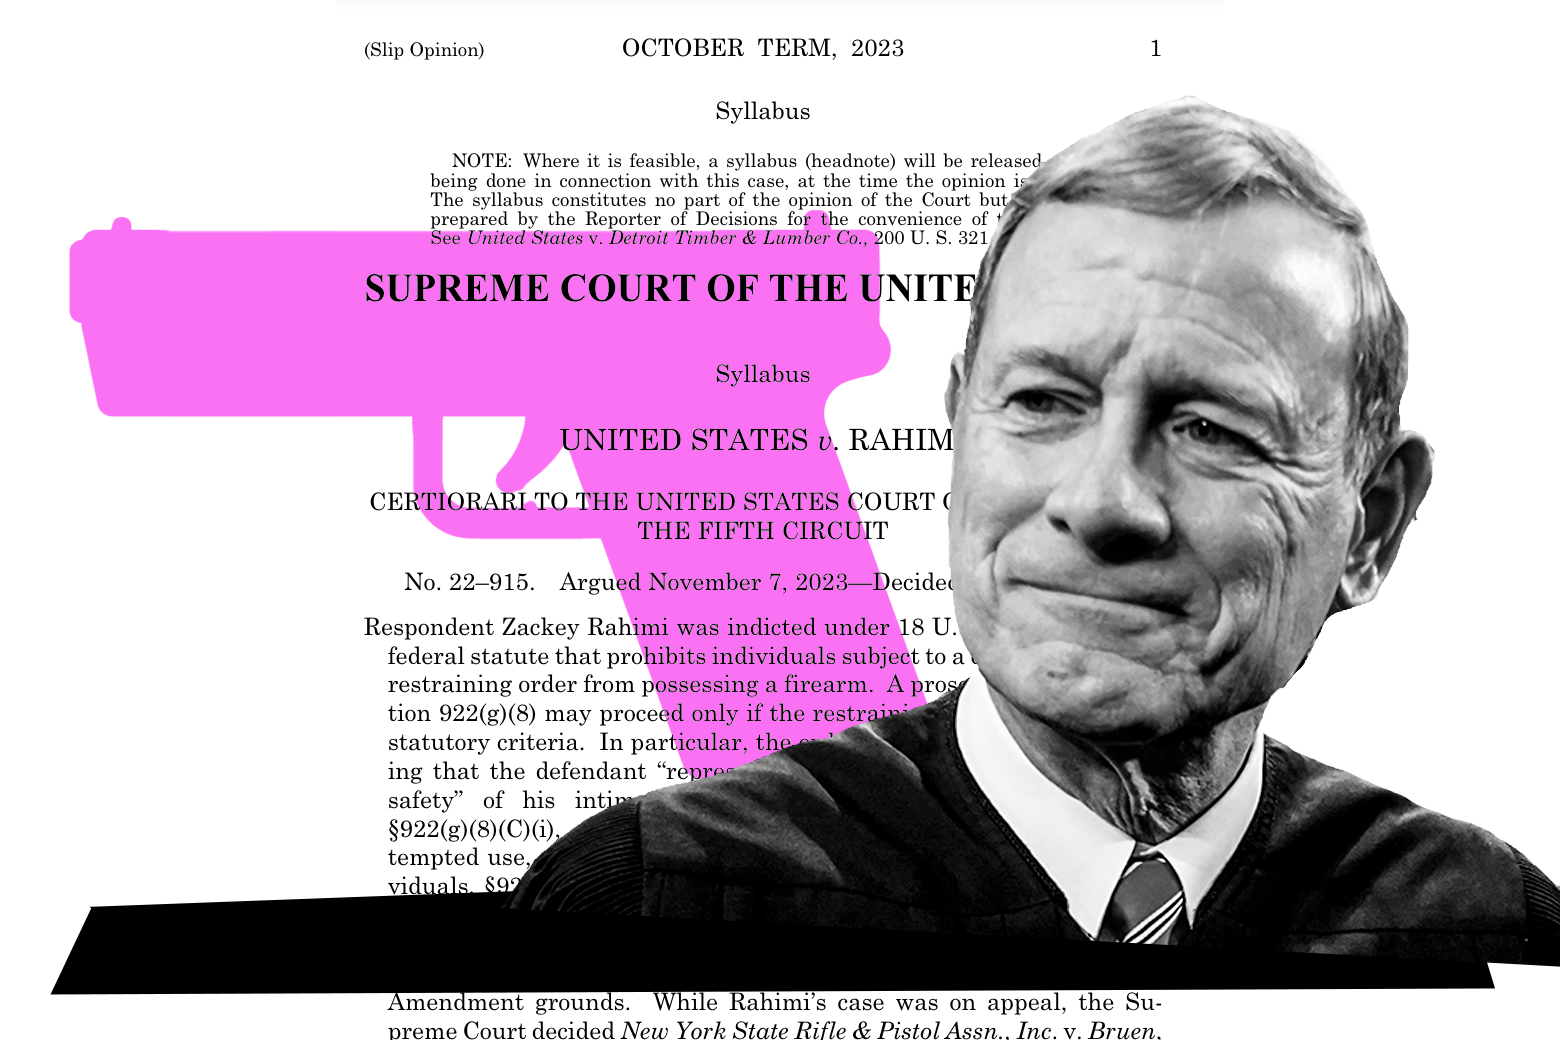 John Roberts smiles over the text of U.S. v. Rahimi and a purple gun in the background.